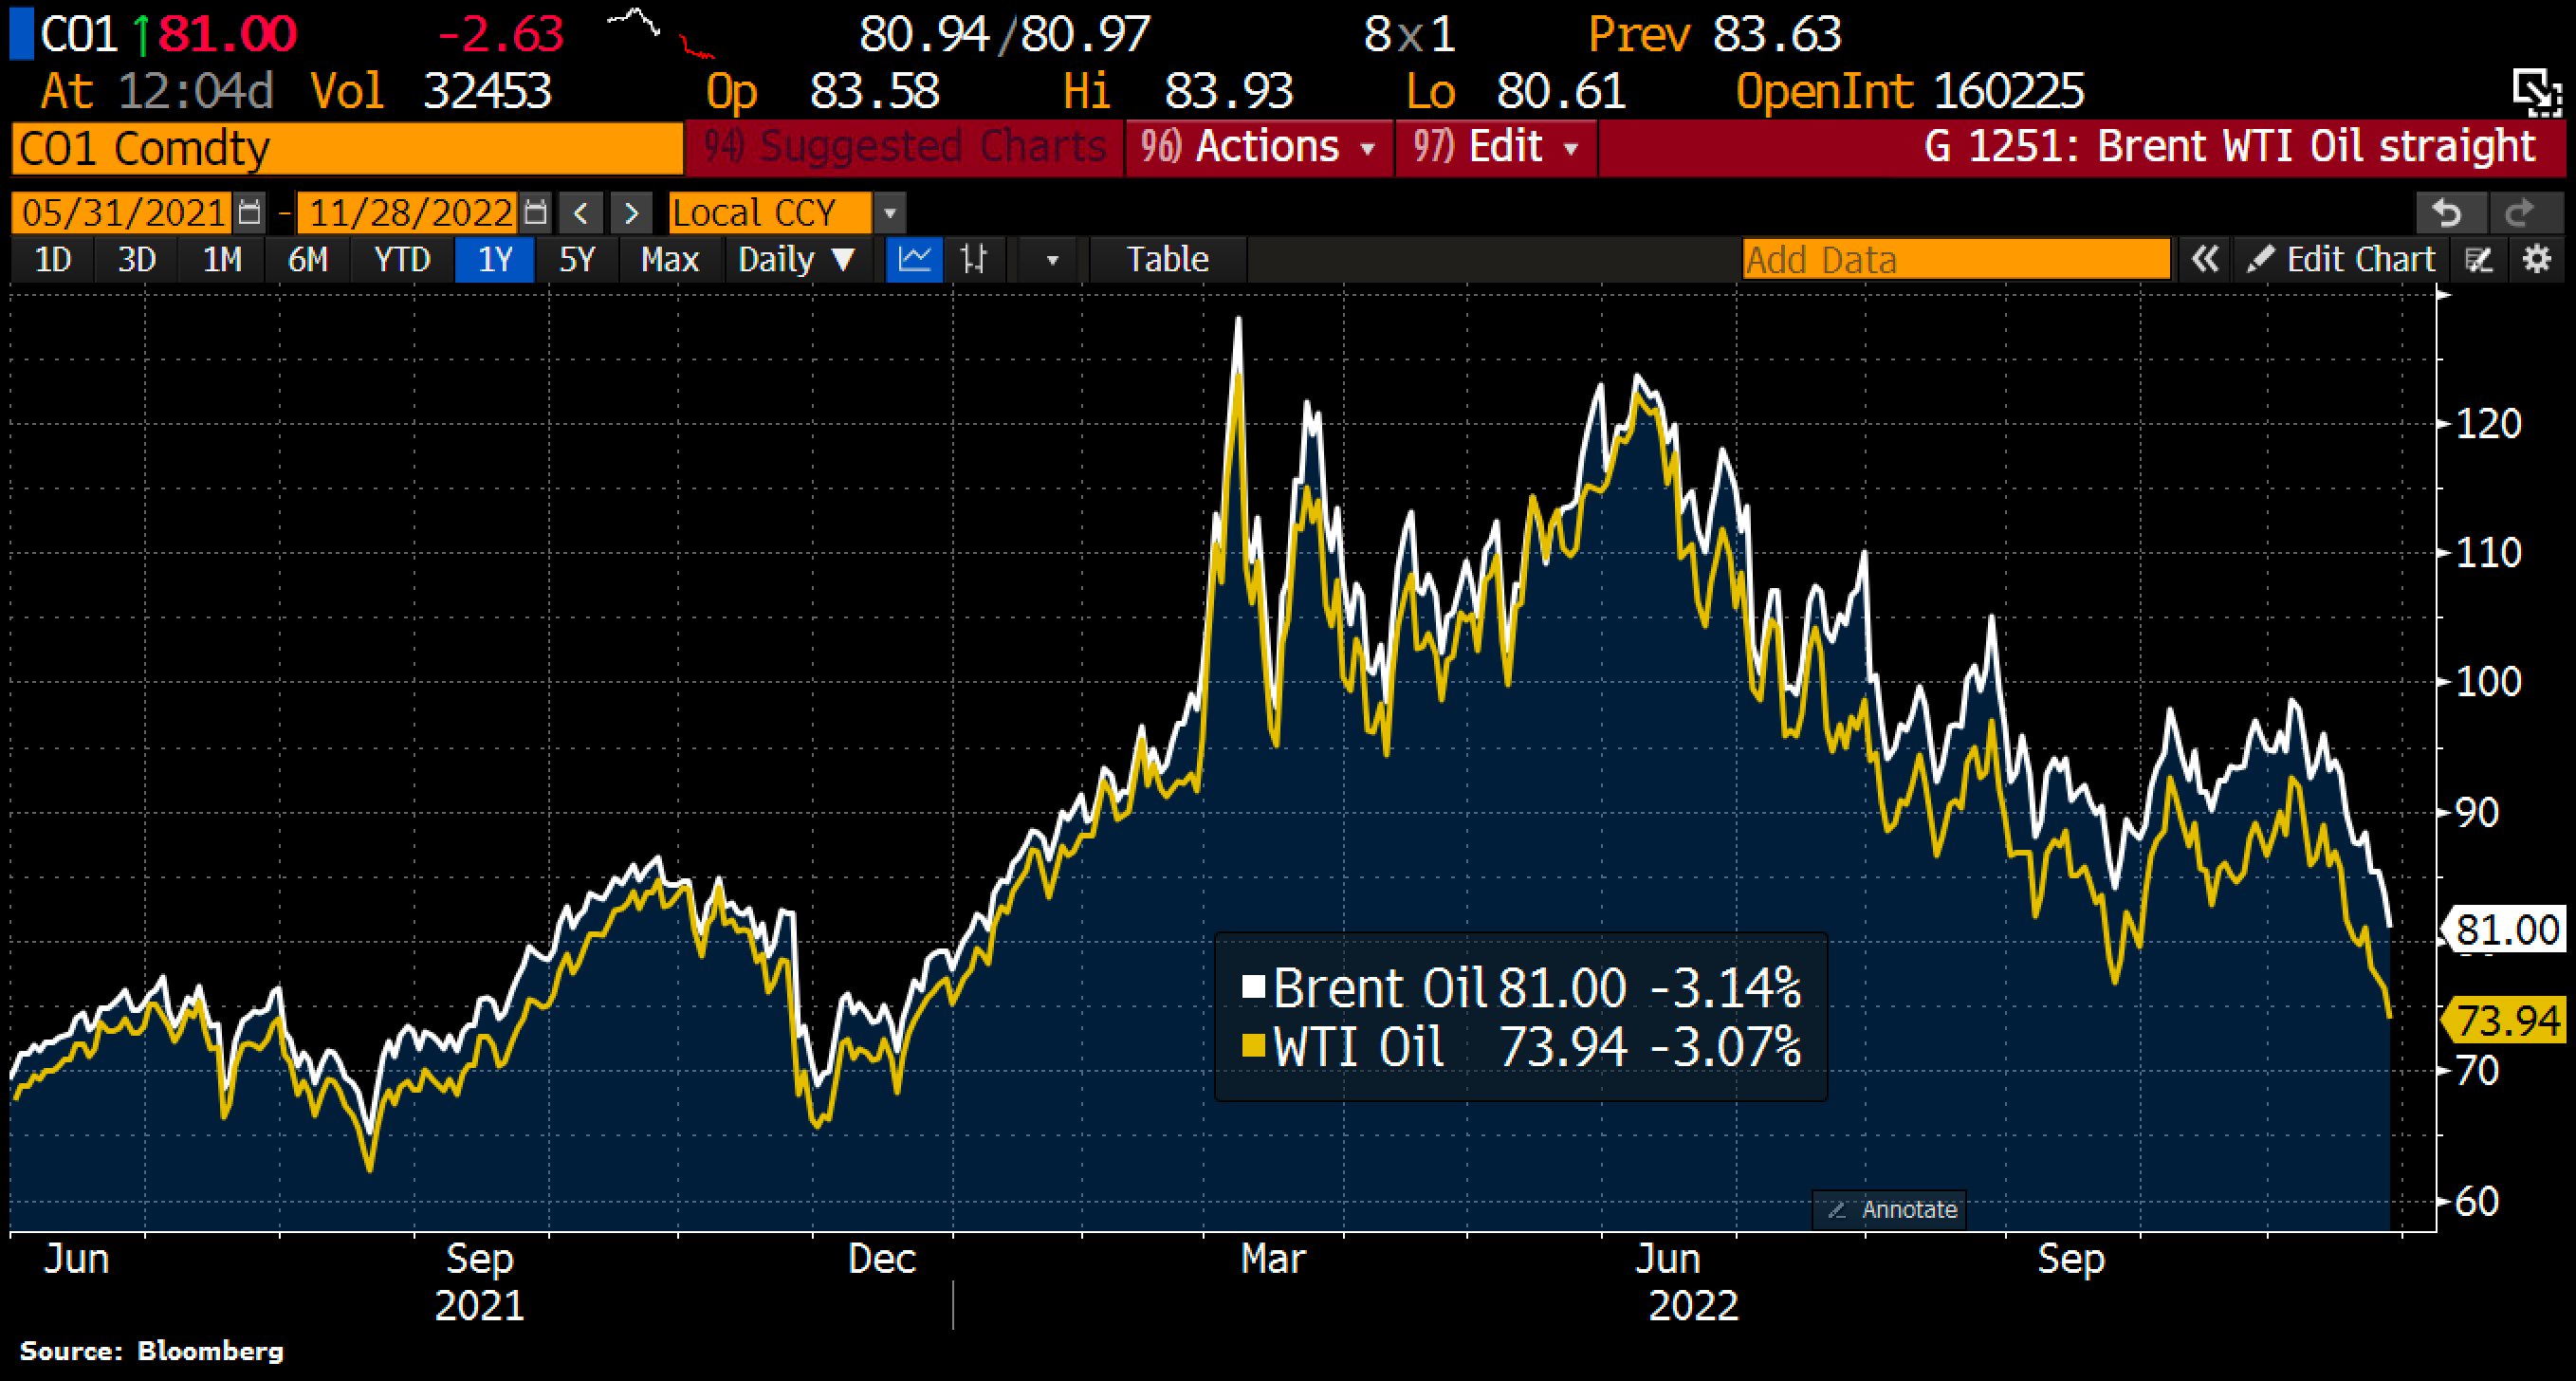 WTI tumbled to lowest since December 2021